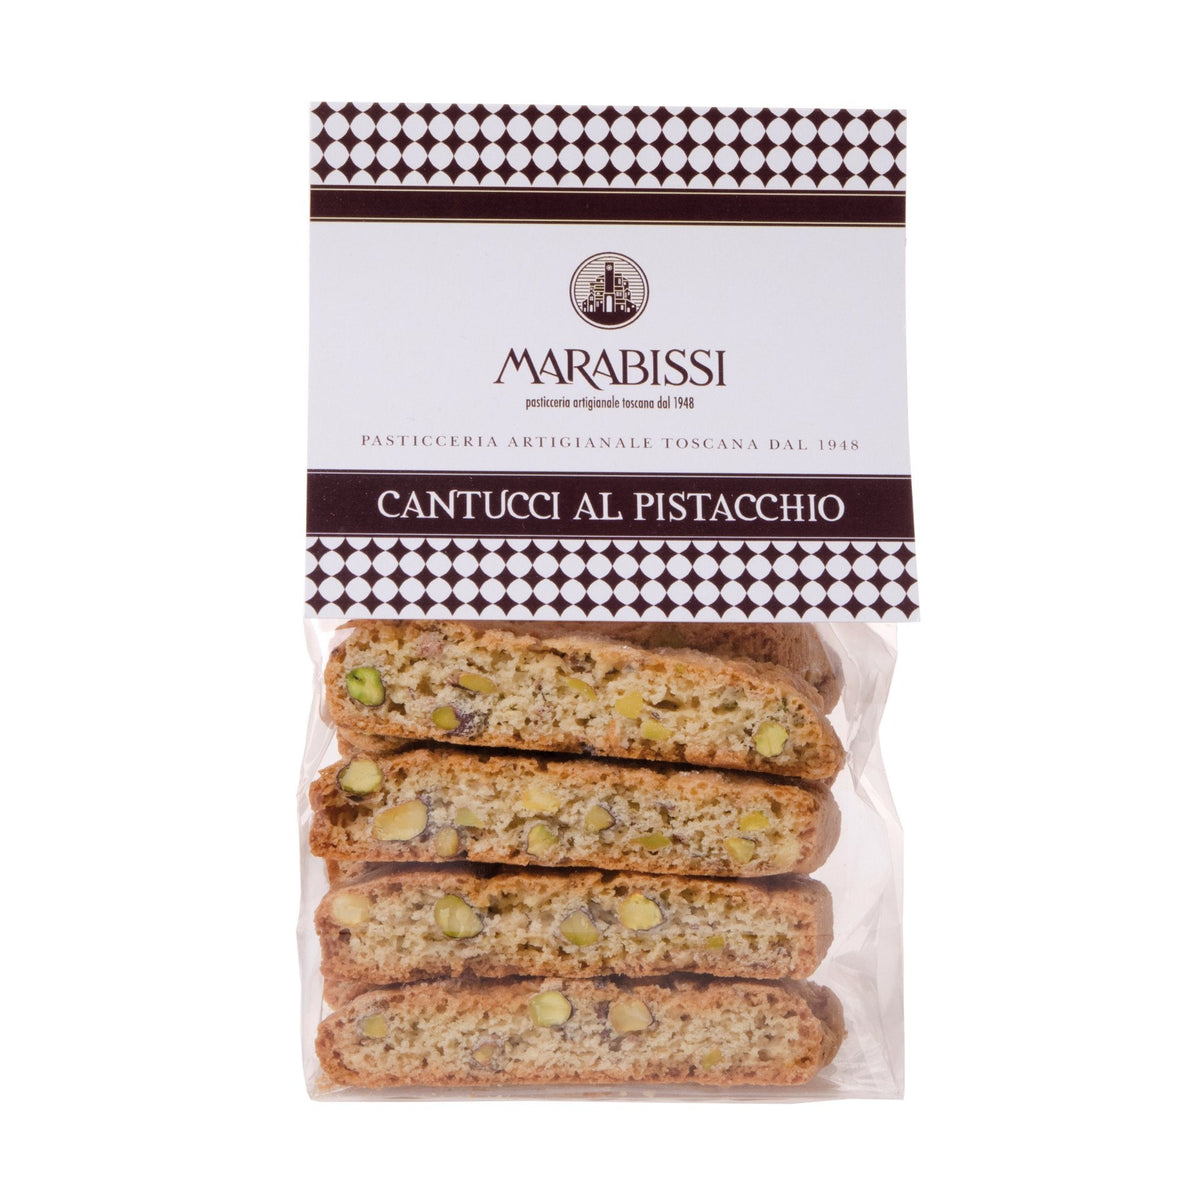 Marabissi Pistachio Cantucci (Bag) 200g  | Imported and distributed in the UK by Just Gourmet Foods